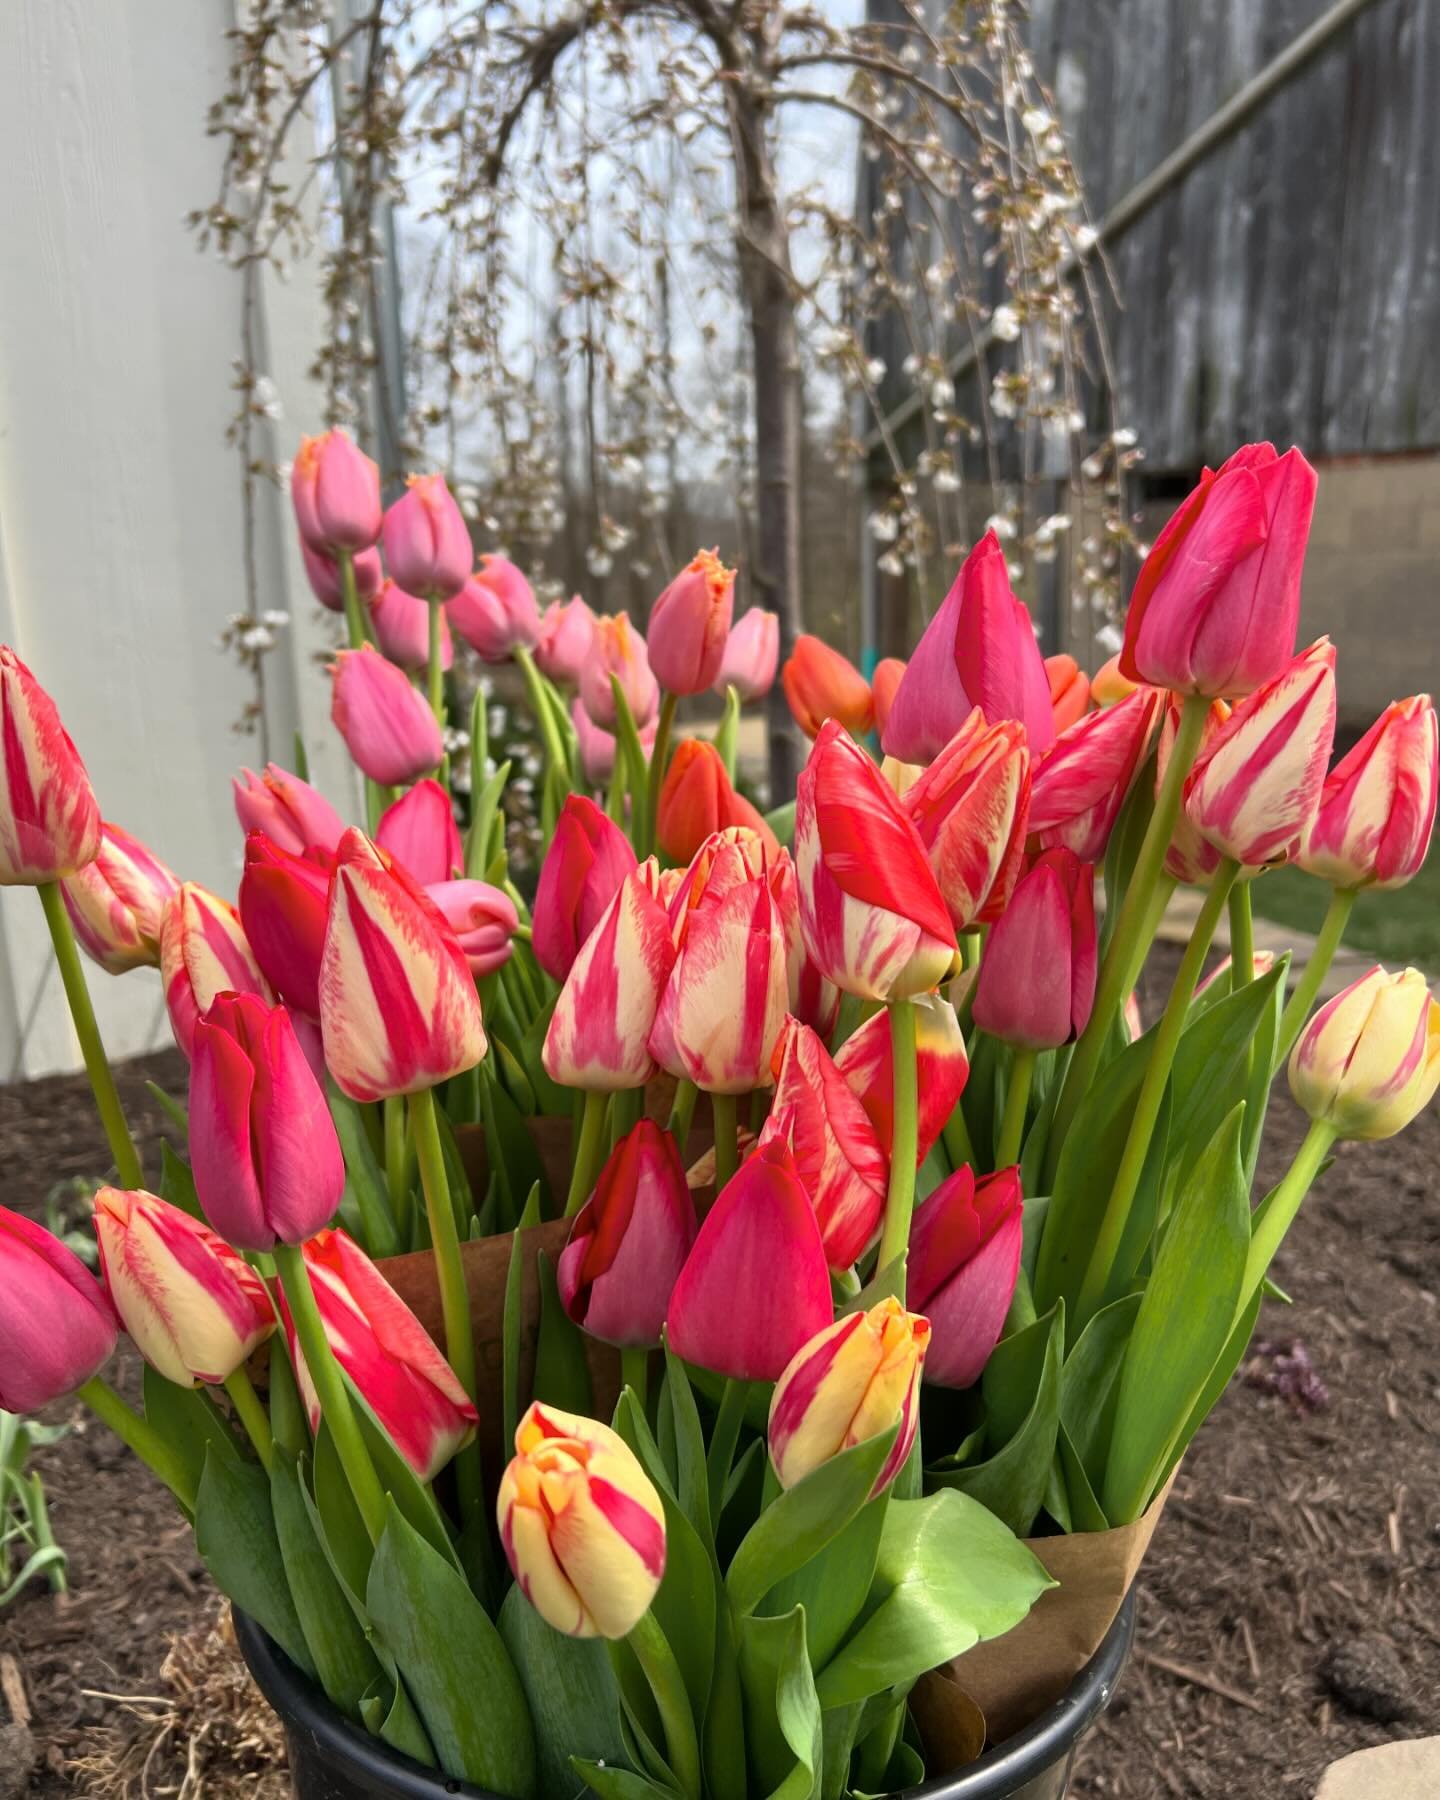 Back to my favorite tulips this season!

Ever since I have forced tulips, &lsquo;Spryng Break&rsquo; and &lsquo;Spryng Tide&rsquo; have been showstoppers for me.

They are Triumph tulips and are consistently strong and big regardless of whether they 